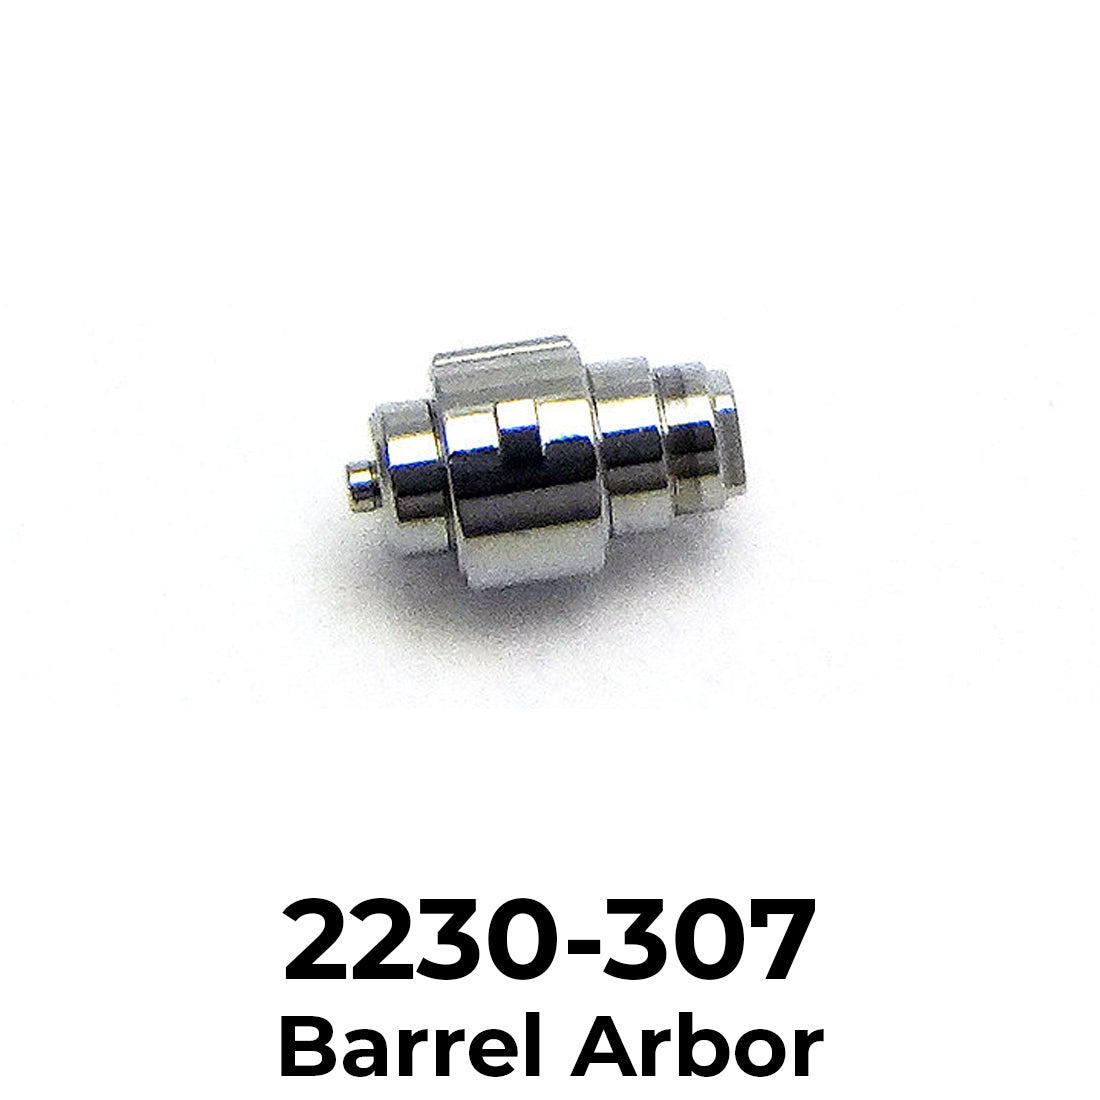 Internal Parts to fit Rolex 22 Series Calibers 2230, 2235, 2236